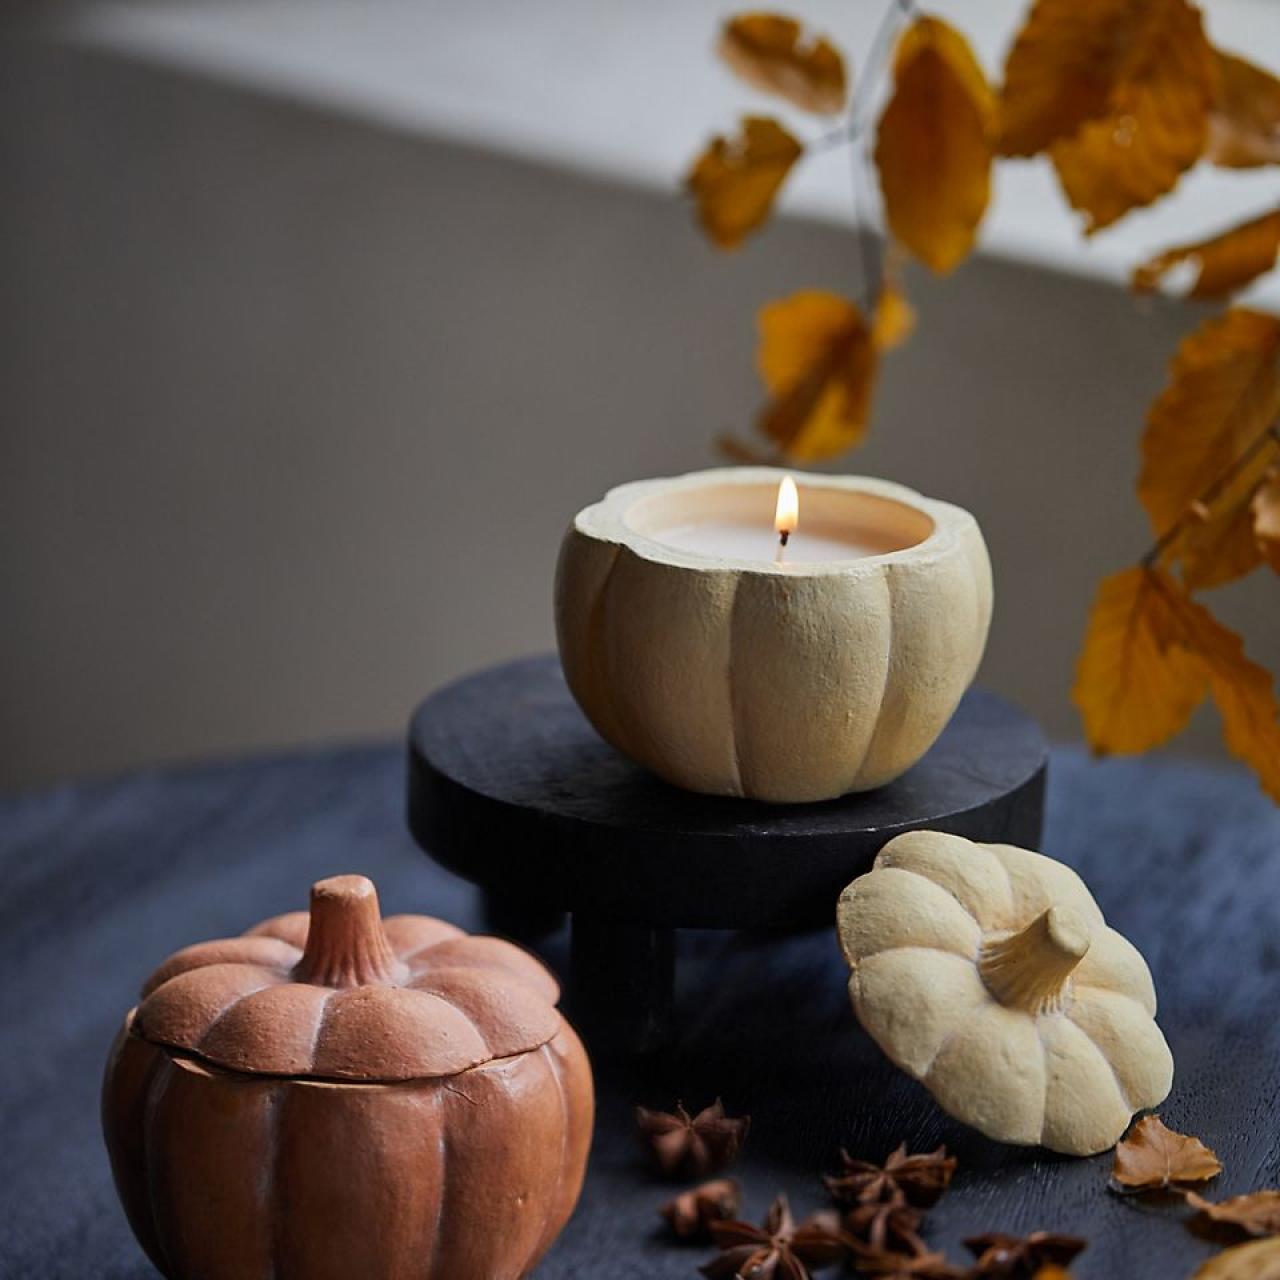 Pumpkin Spice Soy Candles Handmade Upcycled Ceramic Pumpkin